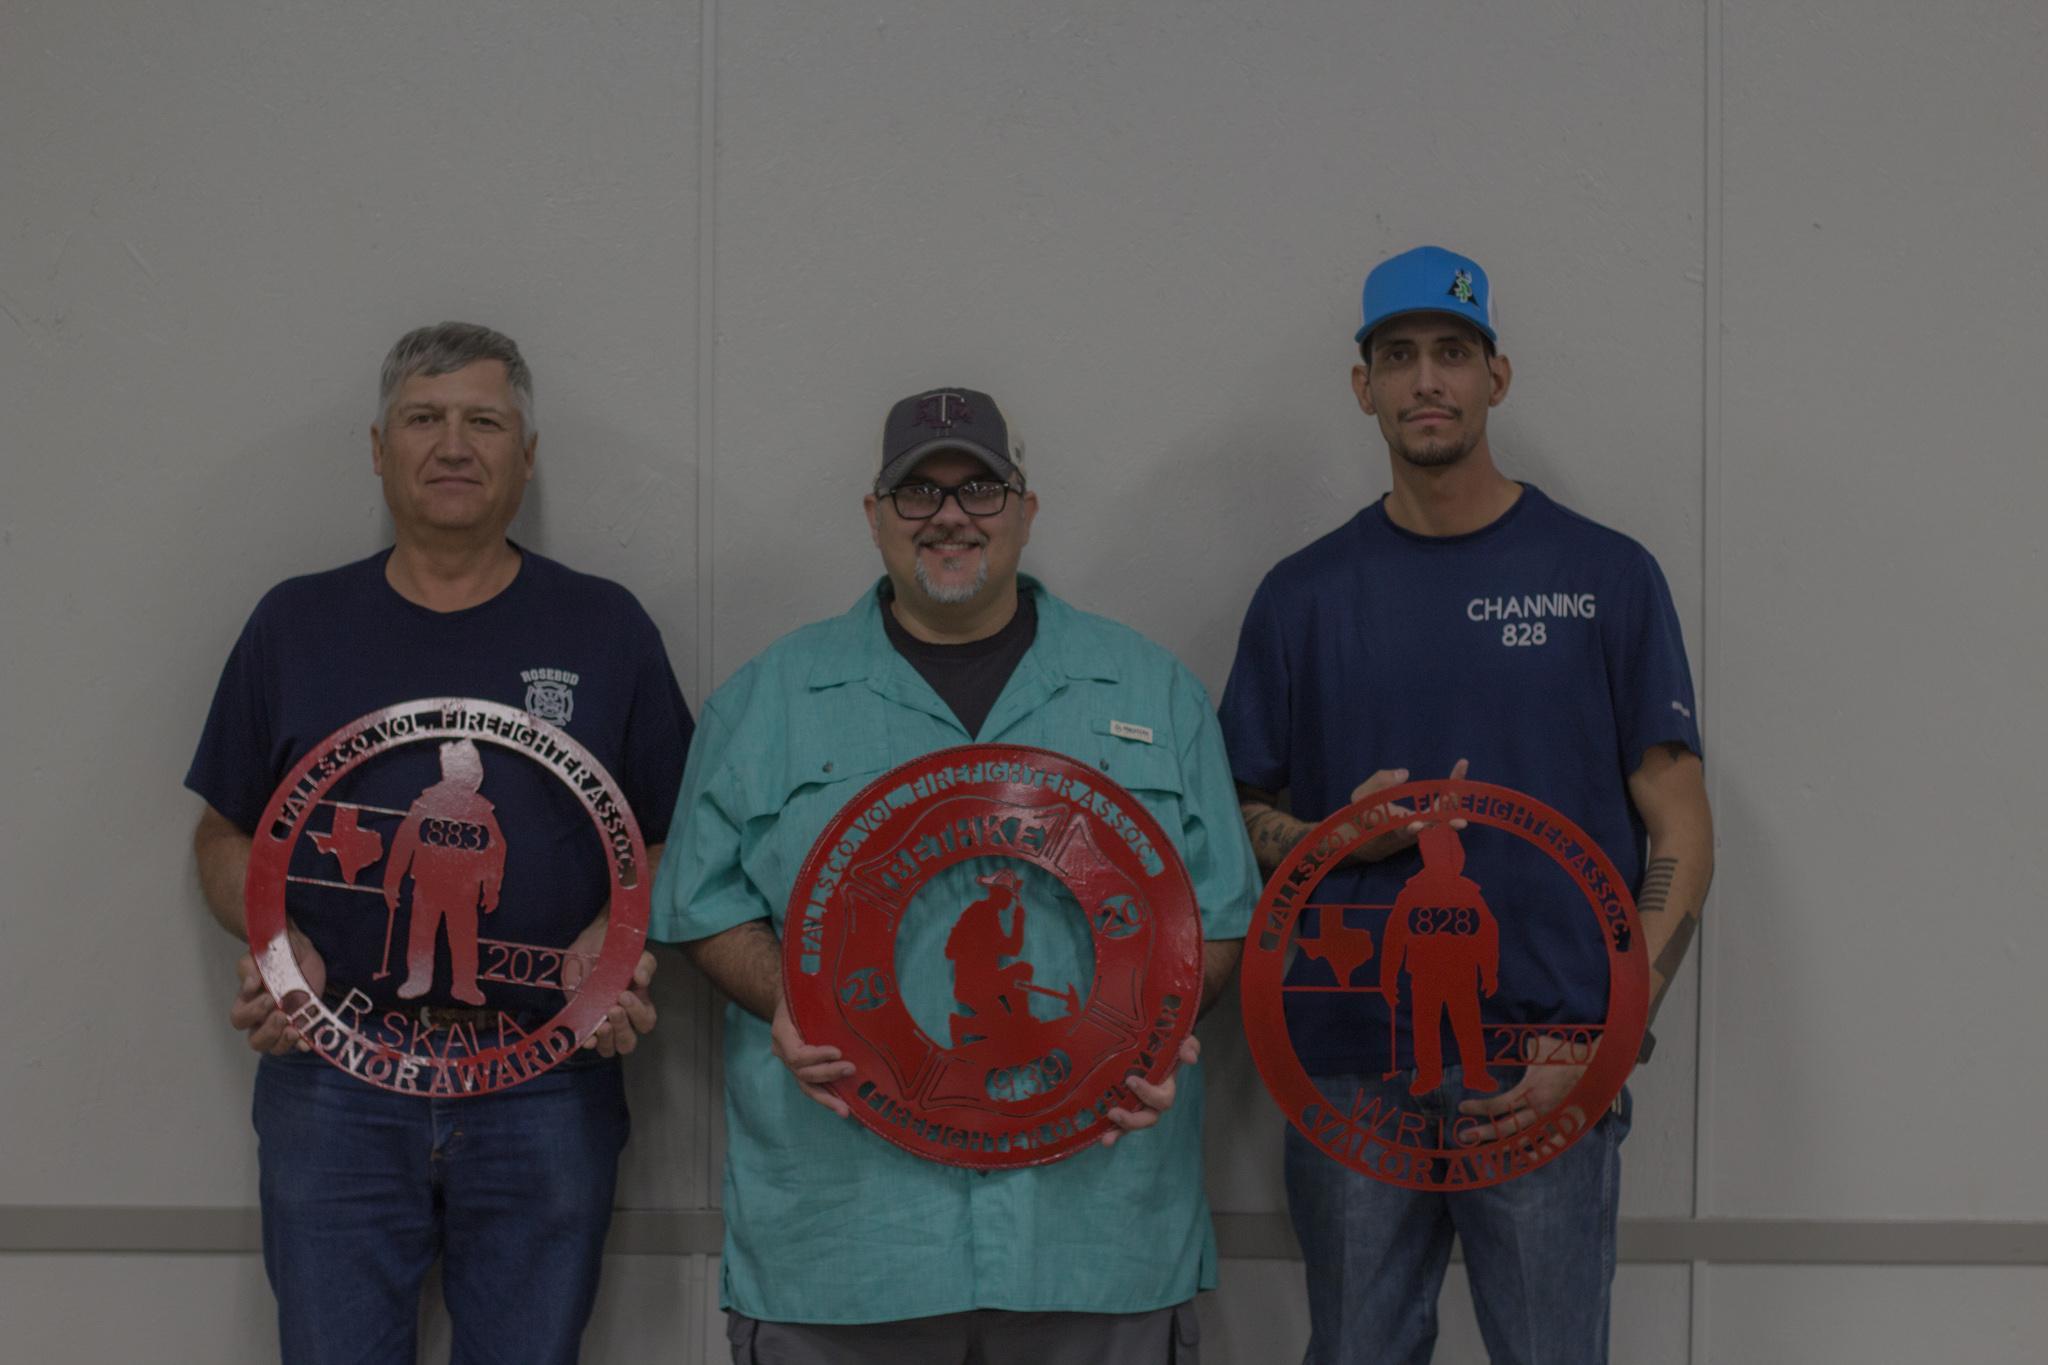 Raymond Skala (Honor), Michael Behke (Fire Fighter of the Year), and Channing Wright (Valor) received personalized metal decals at the Falls County First Responders Dinner.